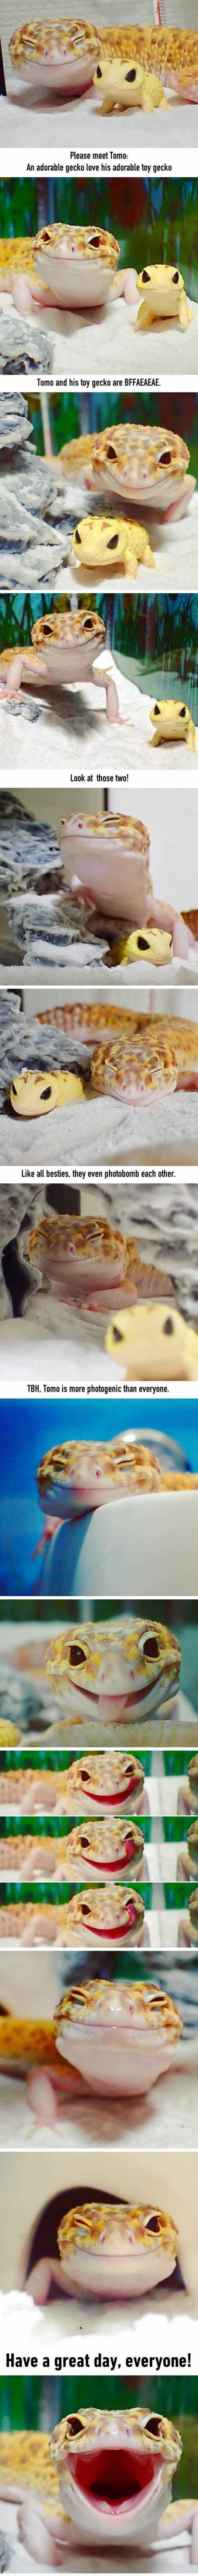 How Cute Is This Gecko And His Toy Gecko?